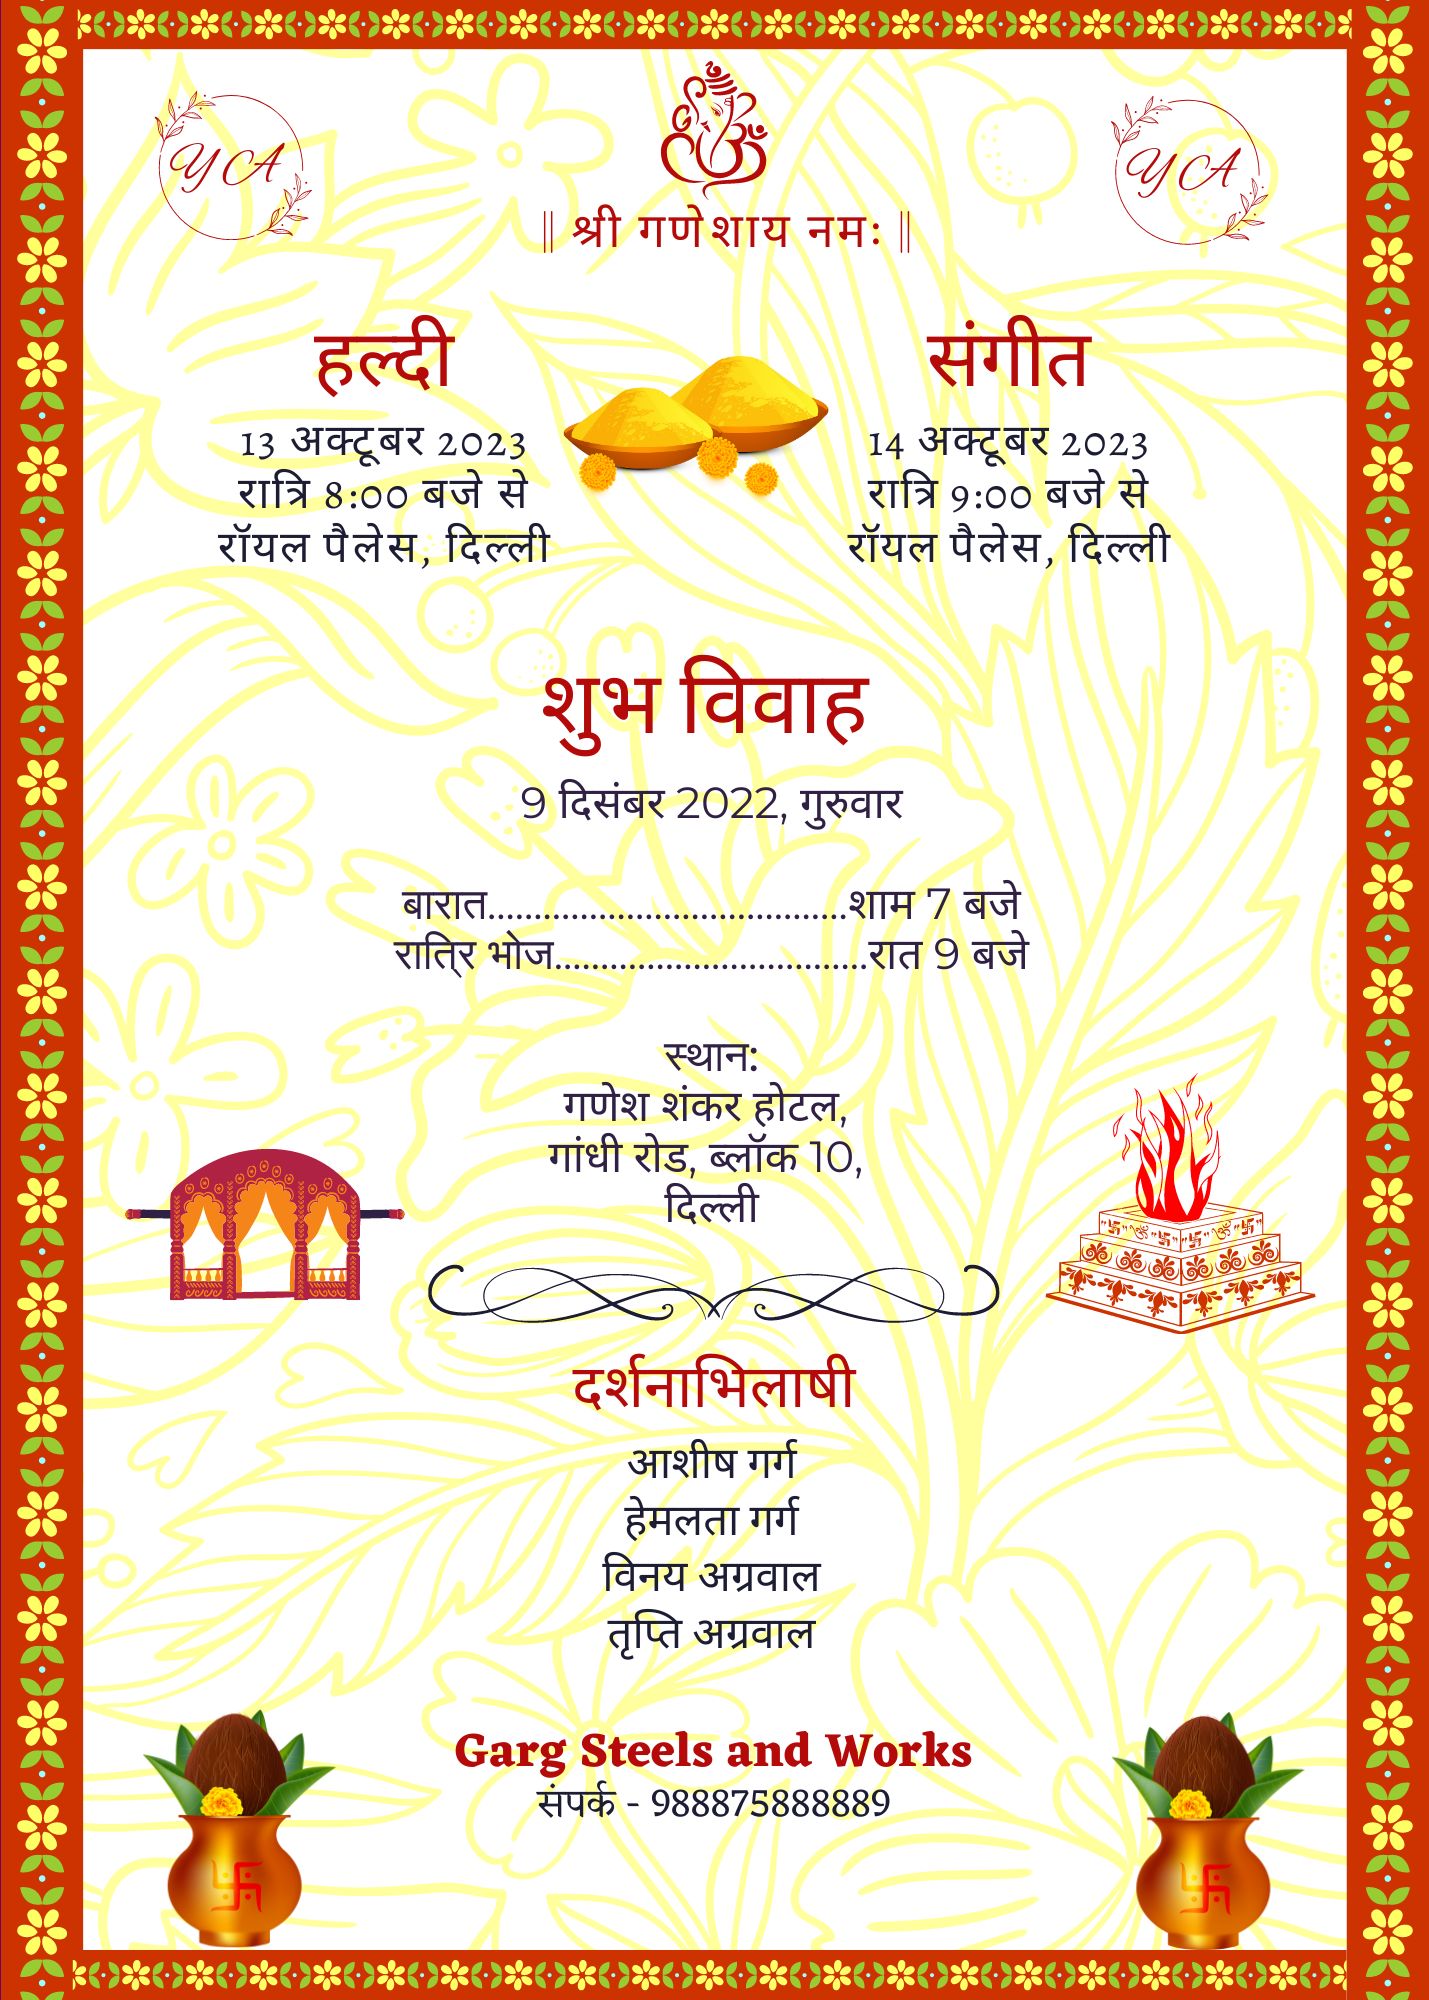 online marriage card maker in hindi